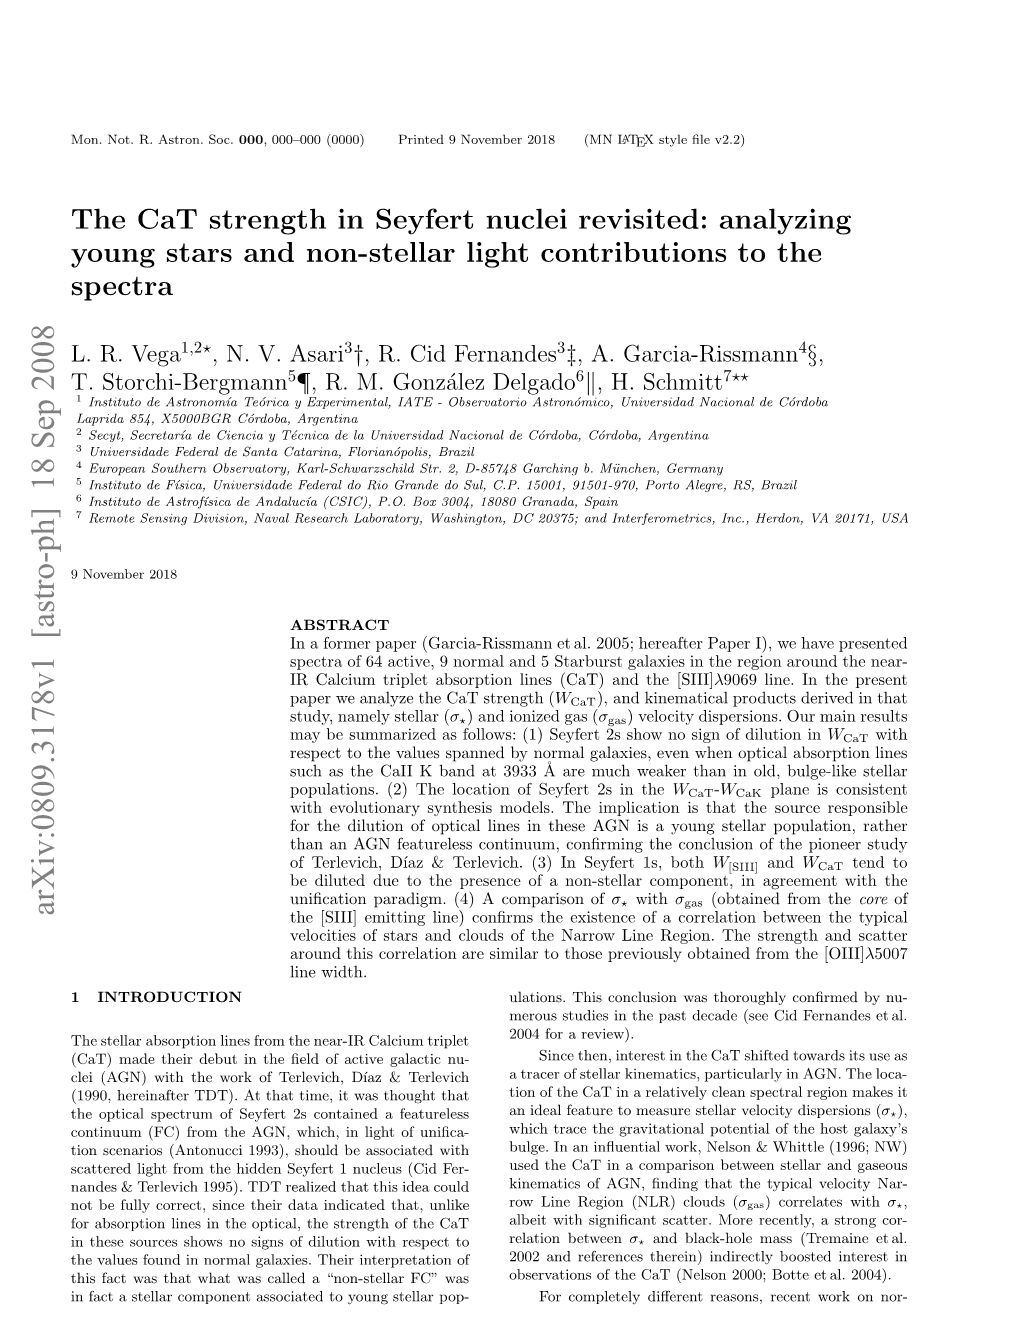 The Cat Strength in Seyfert Nuclei Revisited 3